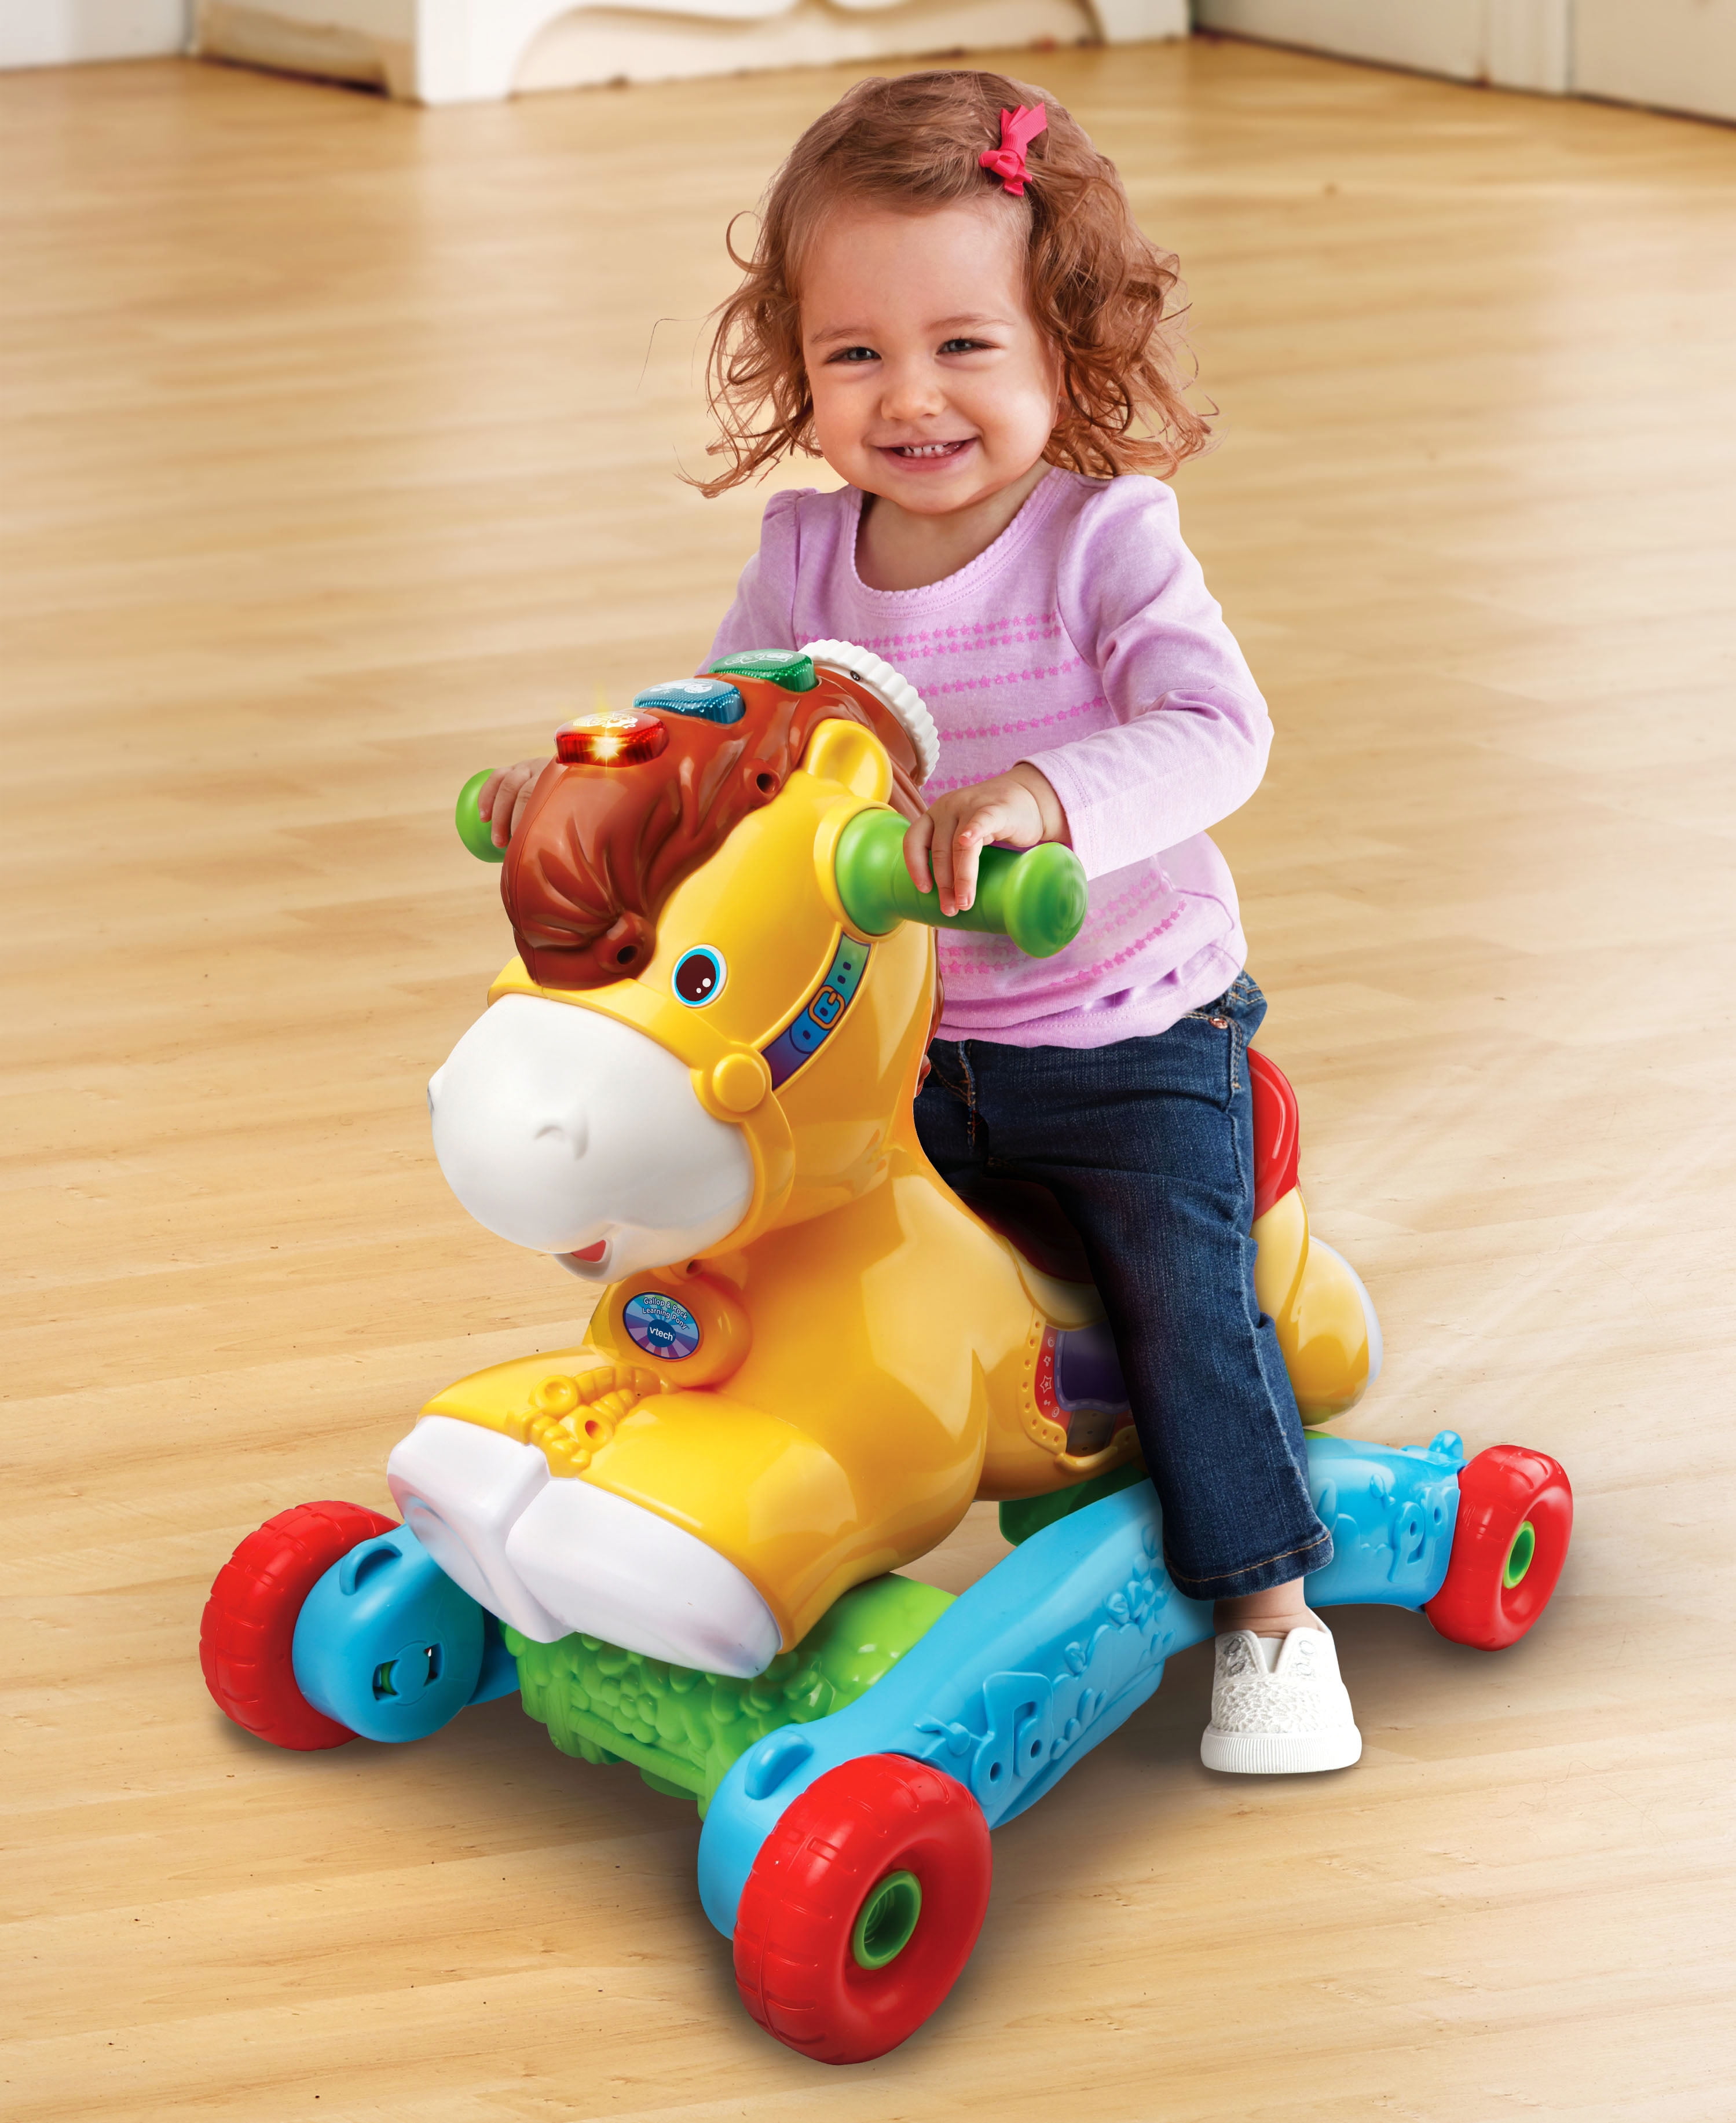 gallop and rock learning pony vtech